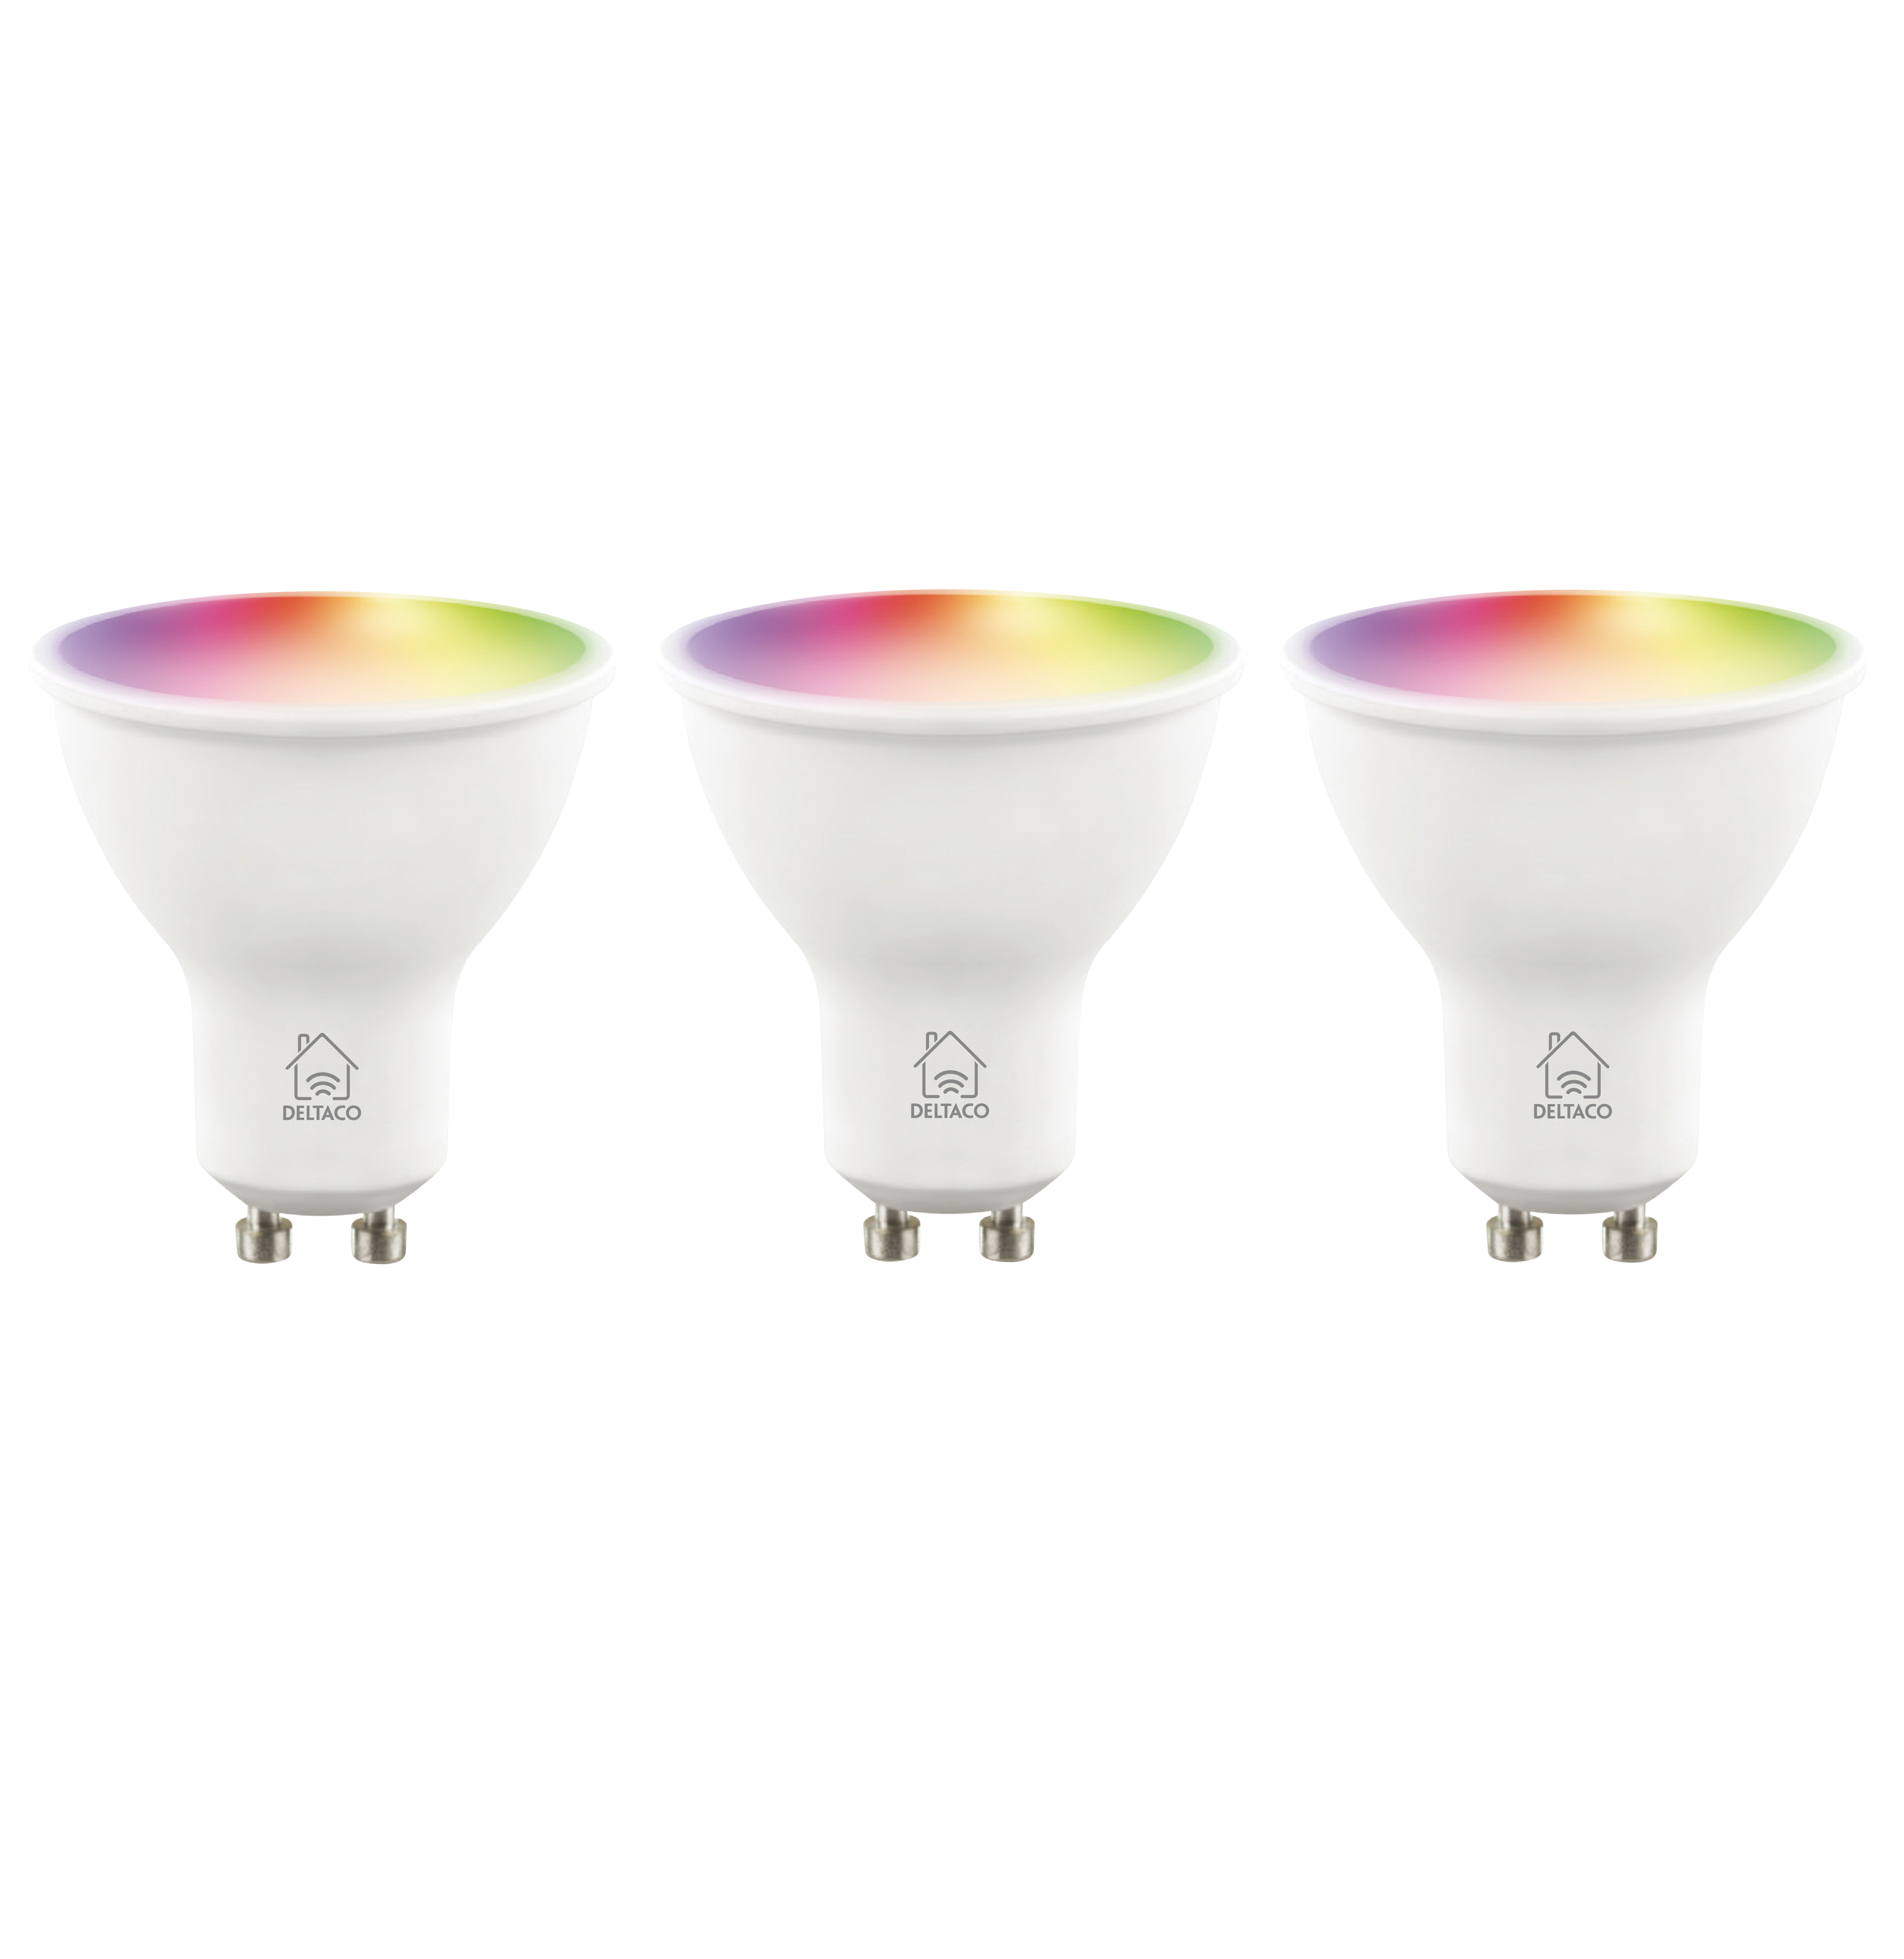 DELTACO 3-Pack Smart Bulbs GU10 LED Bulb 5W 470lm WiFi – Dimmable White & RGB Light